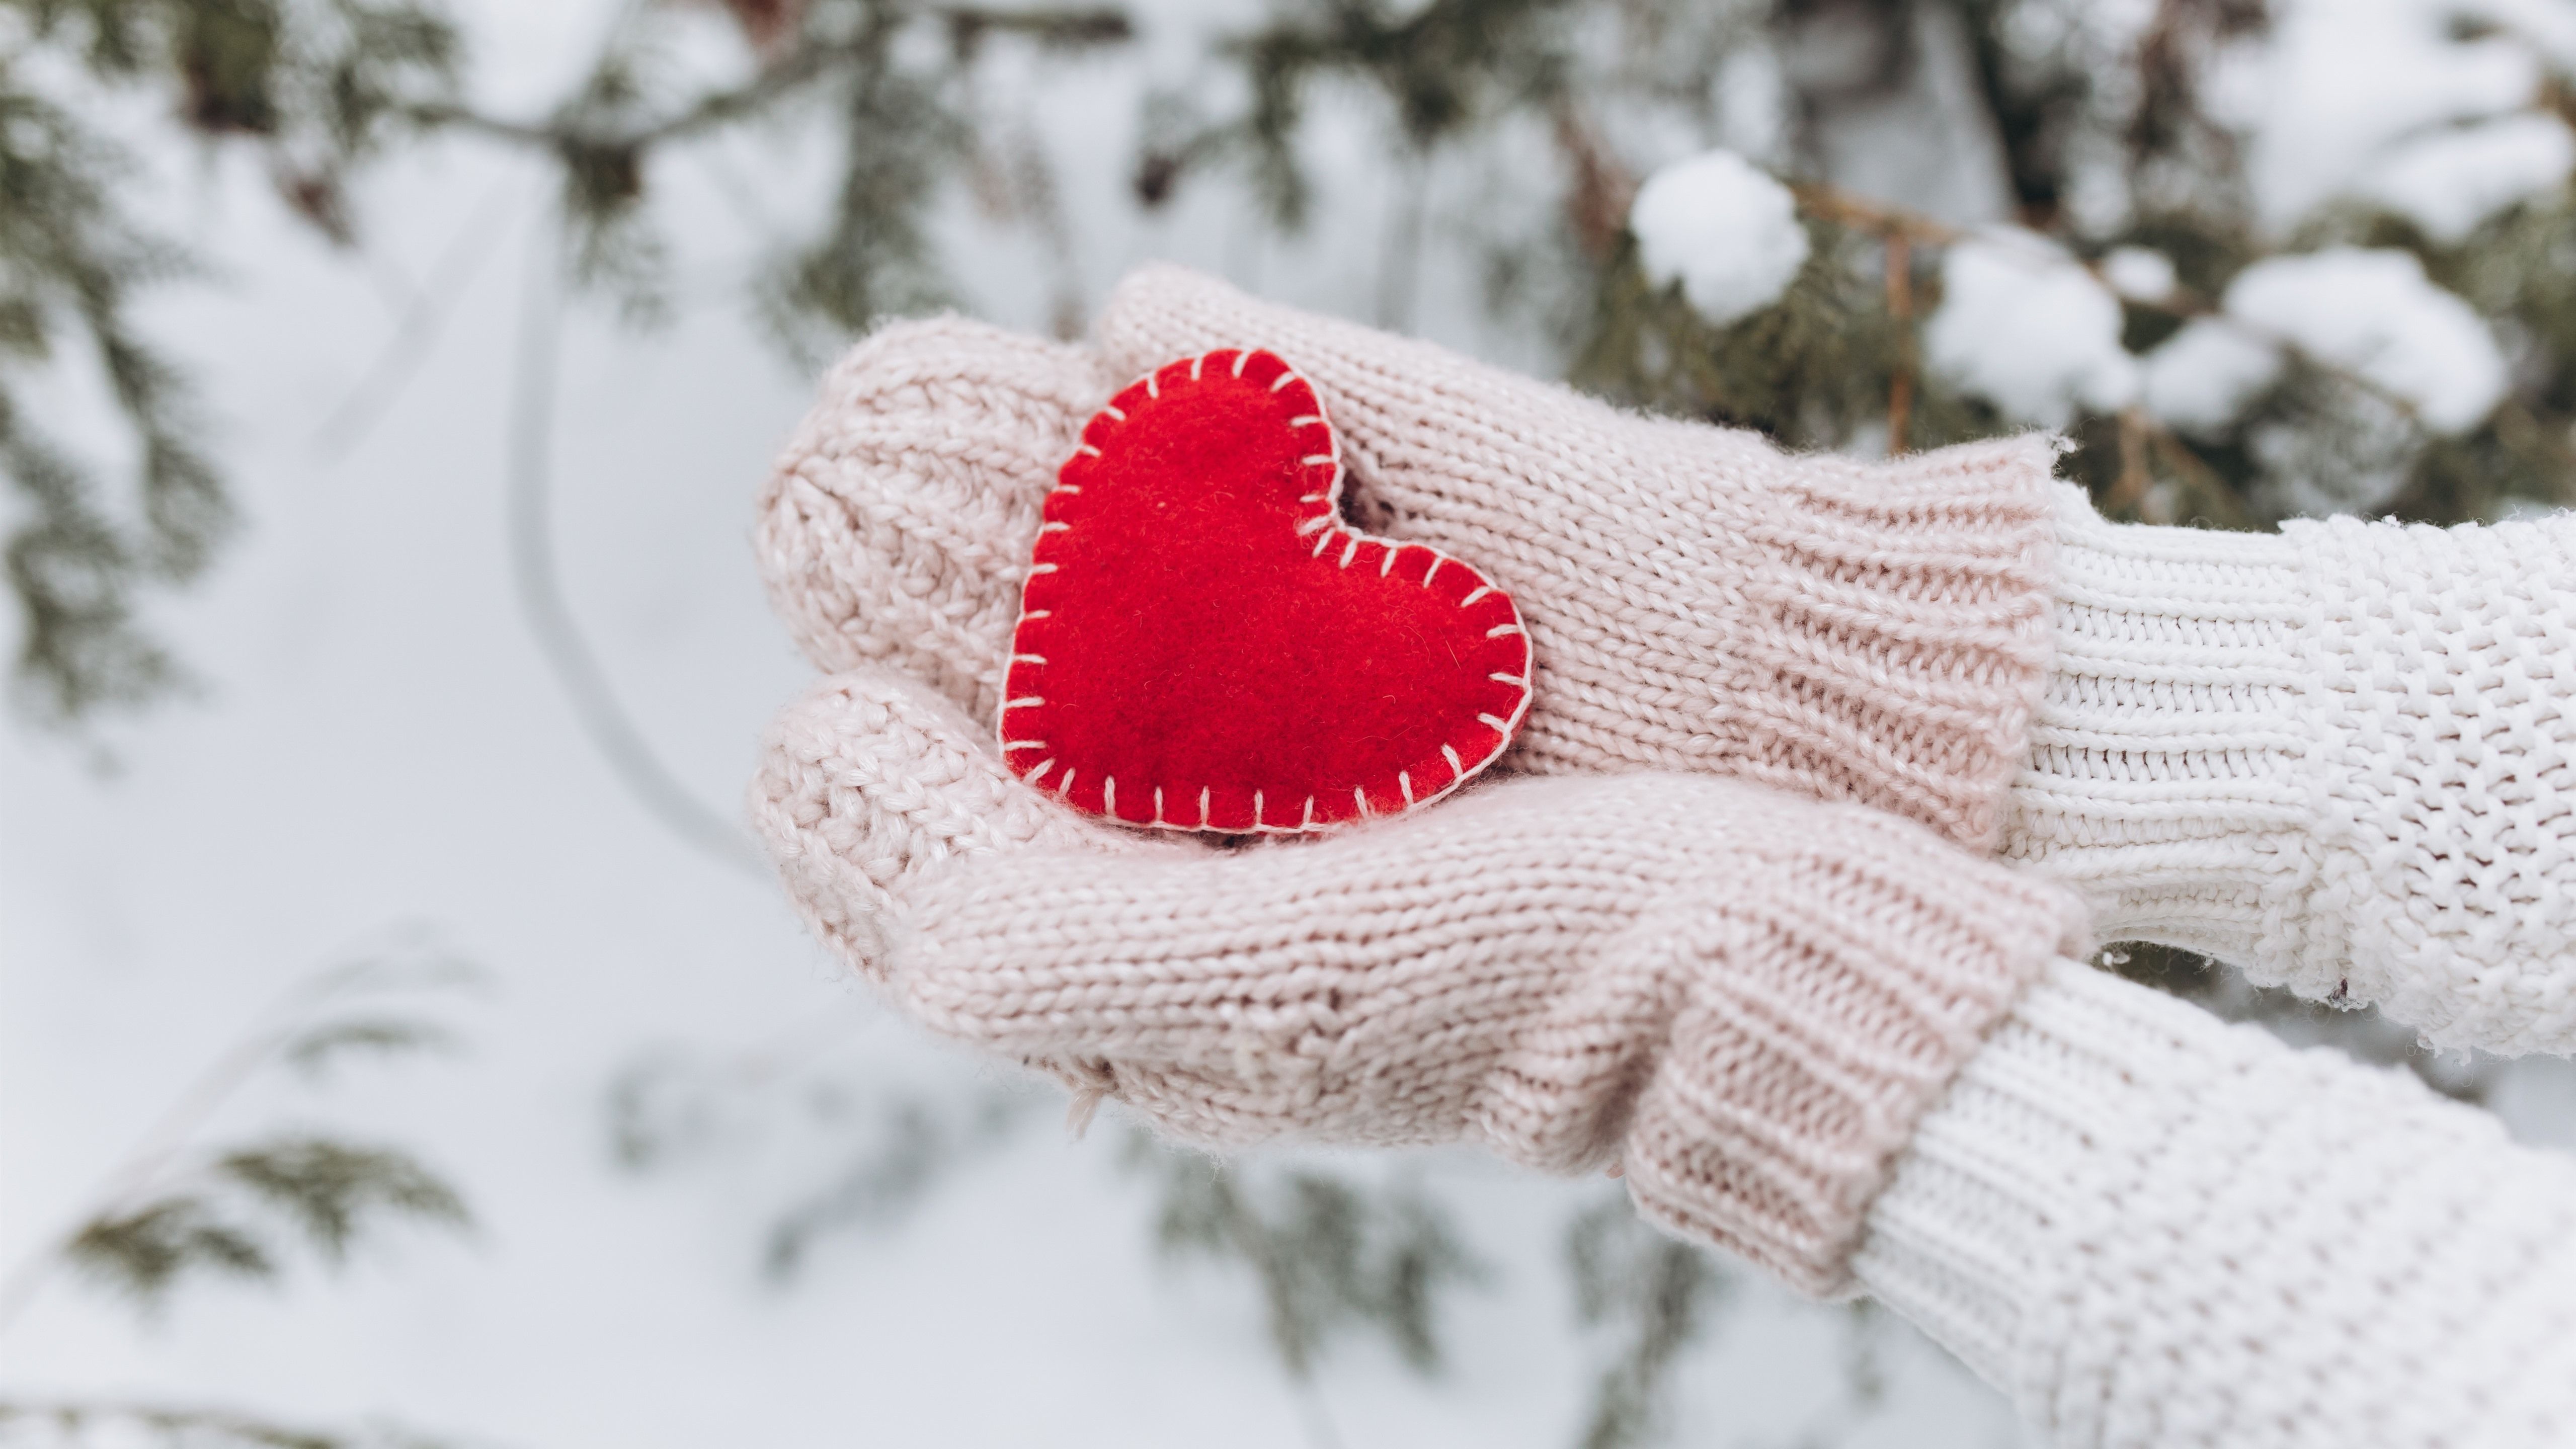 Wallpaper Red love heart, hands, gloves, winter 5120x2880 UHD 5K Picture, Image